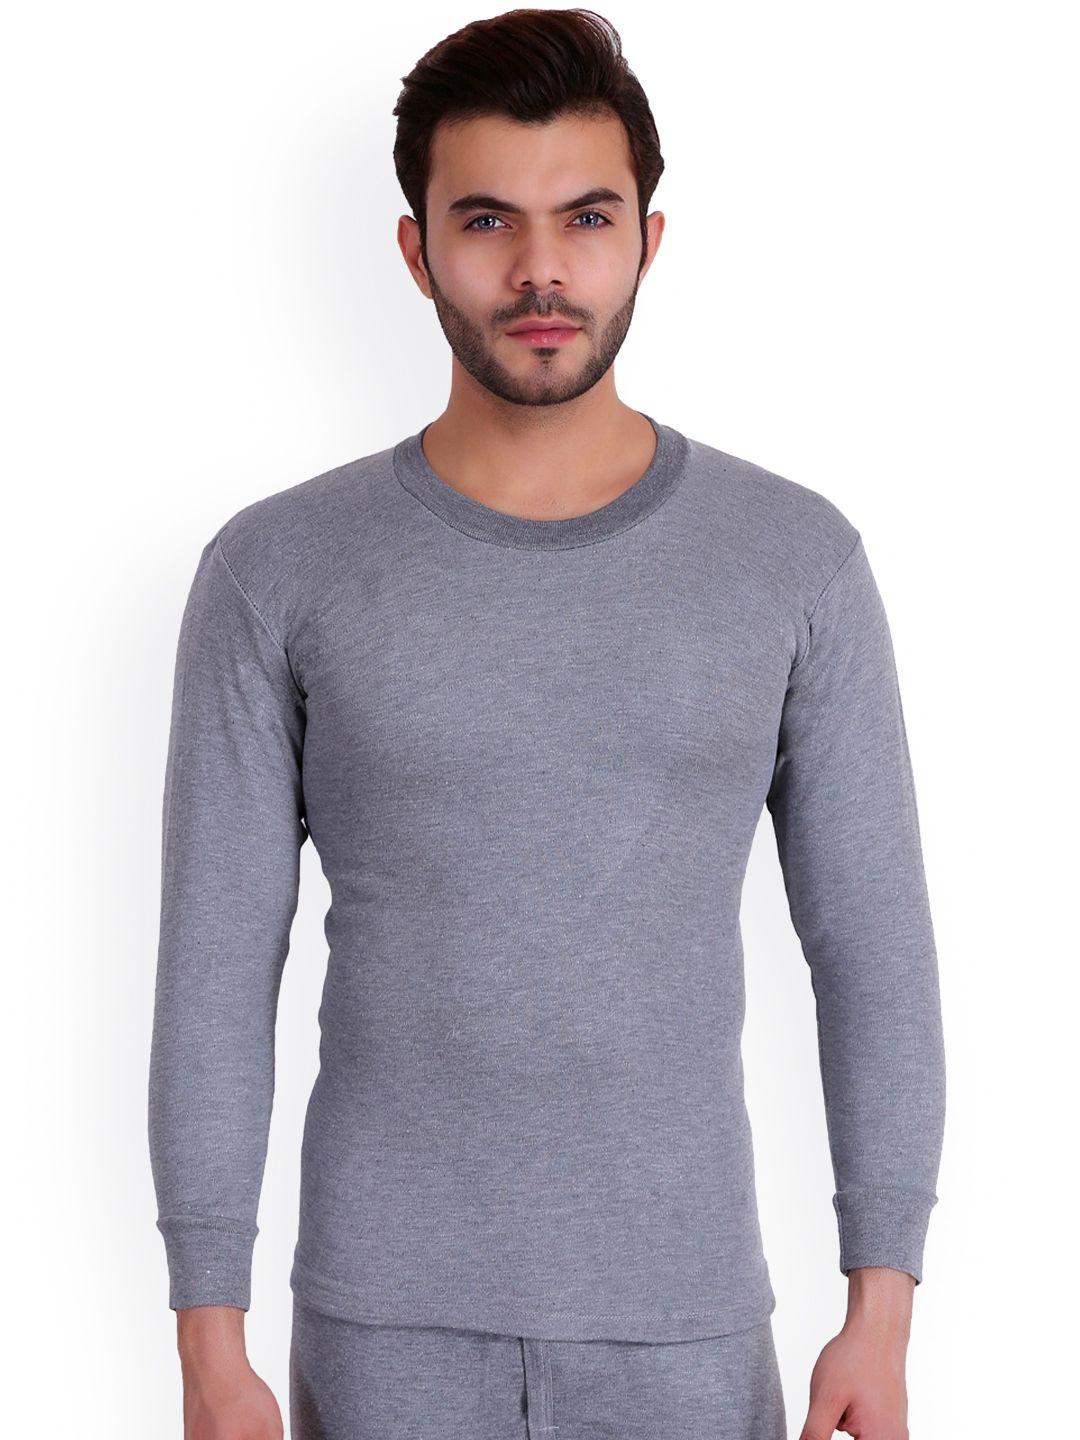 t.t. slim fit round neck thermal top